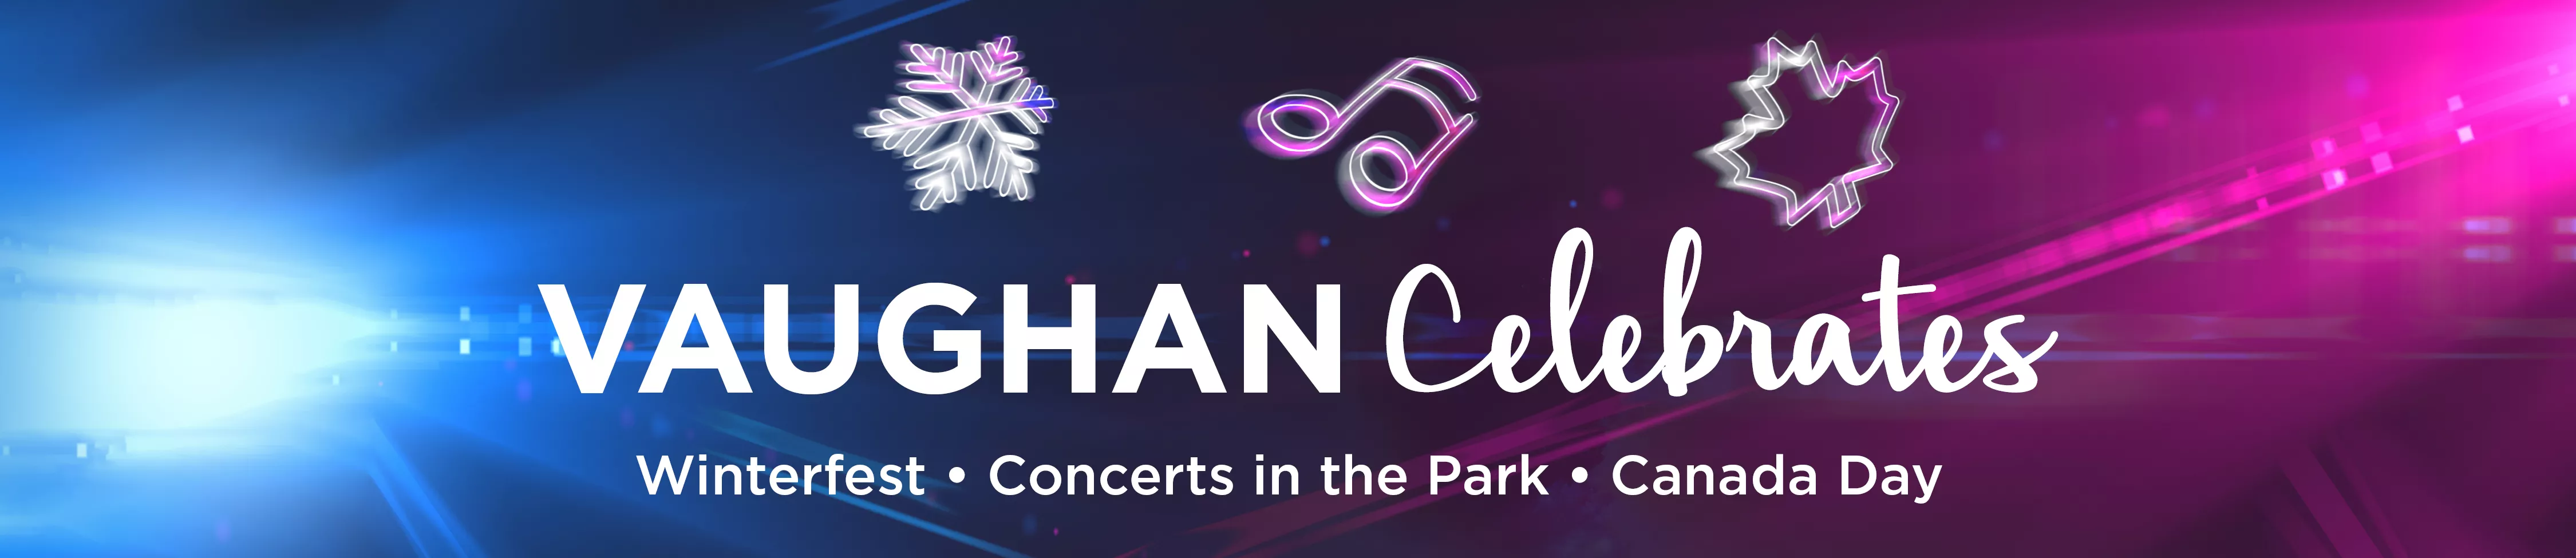 Blue and purple banner with snowflake, music note and leaf icon. Vaughan Celebrates, Winterfest, Concerts in the Park, Canada Day